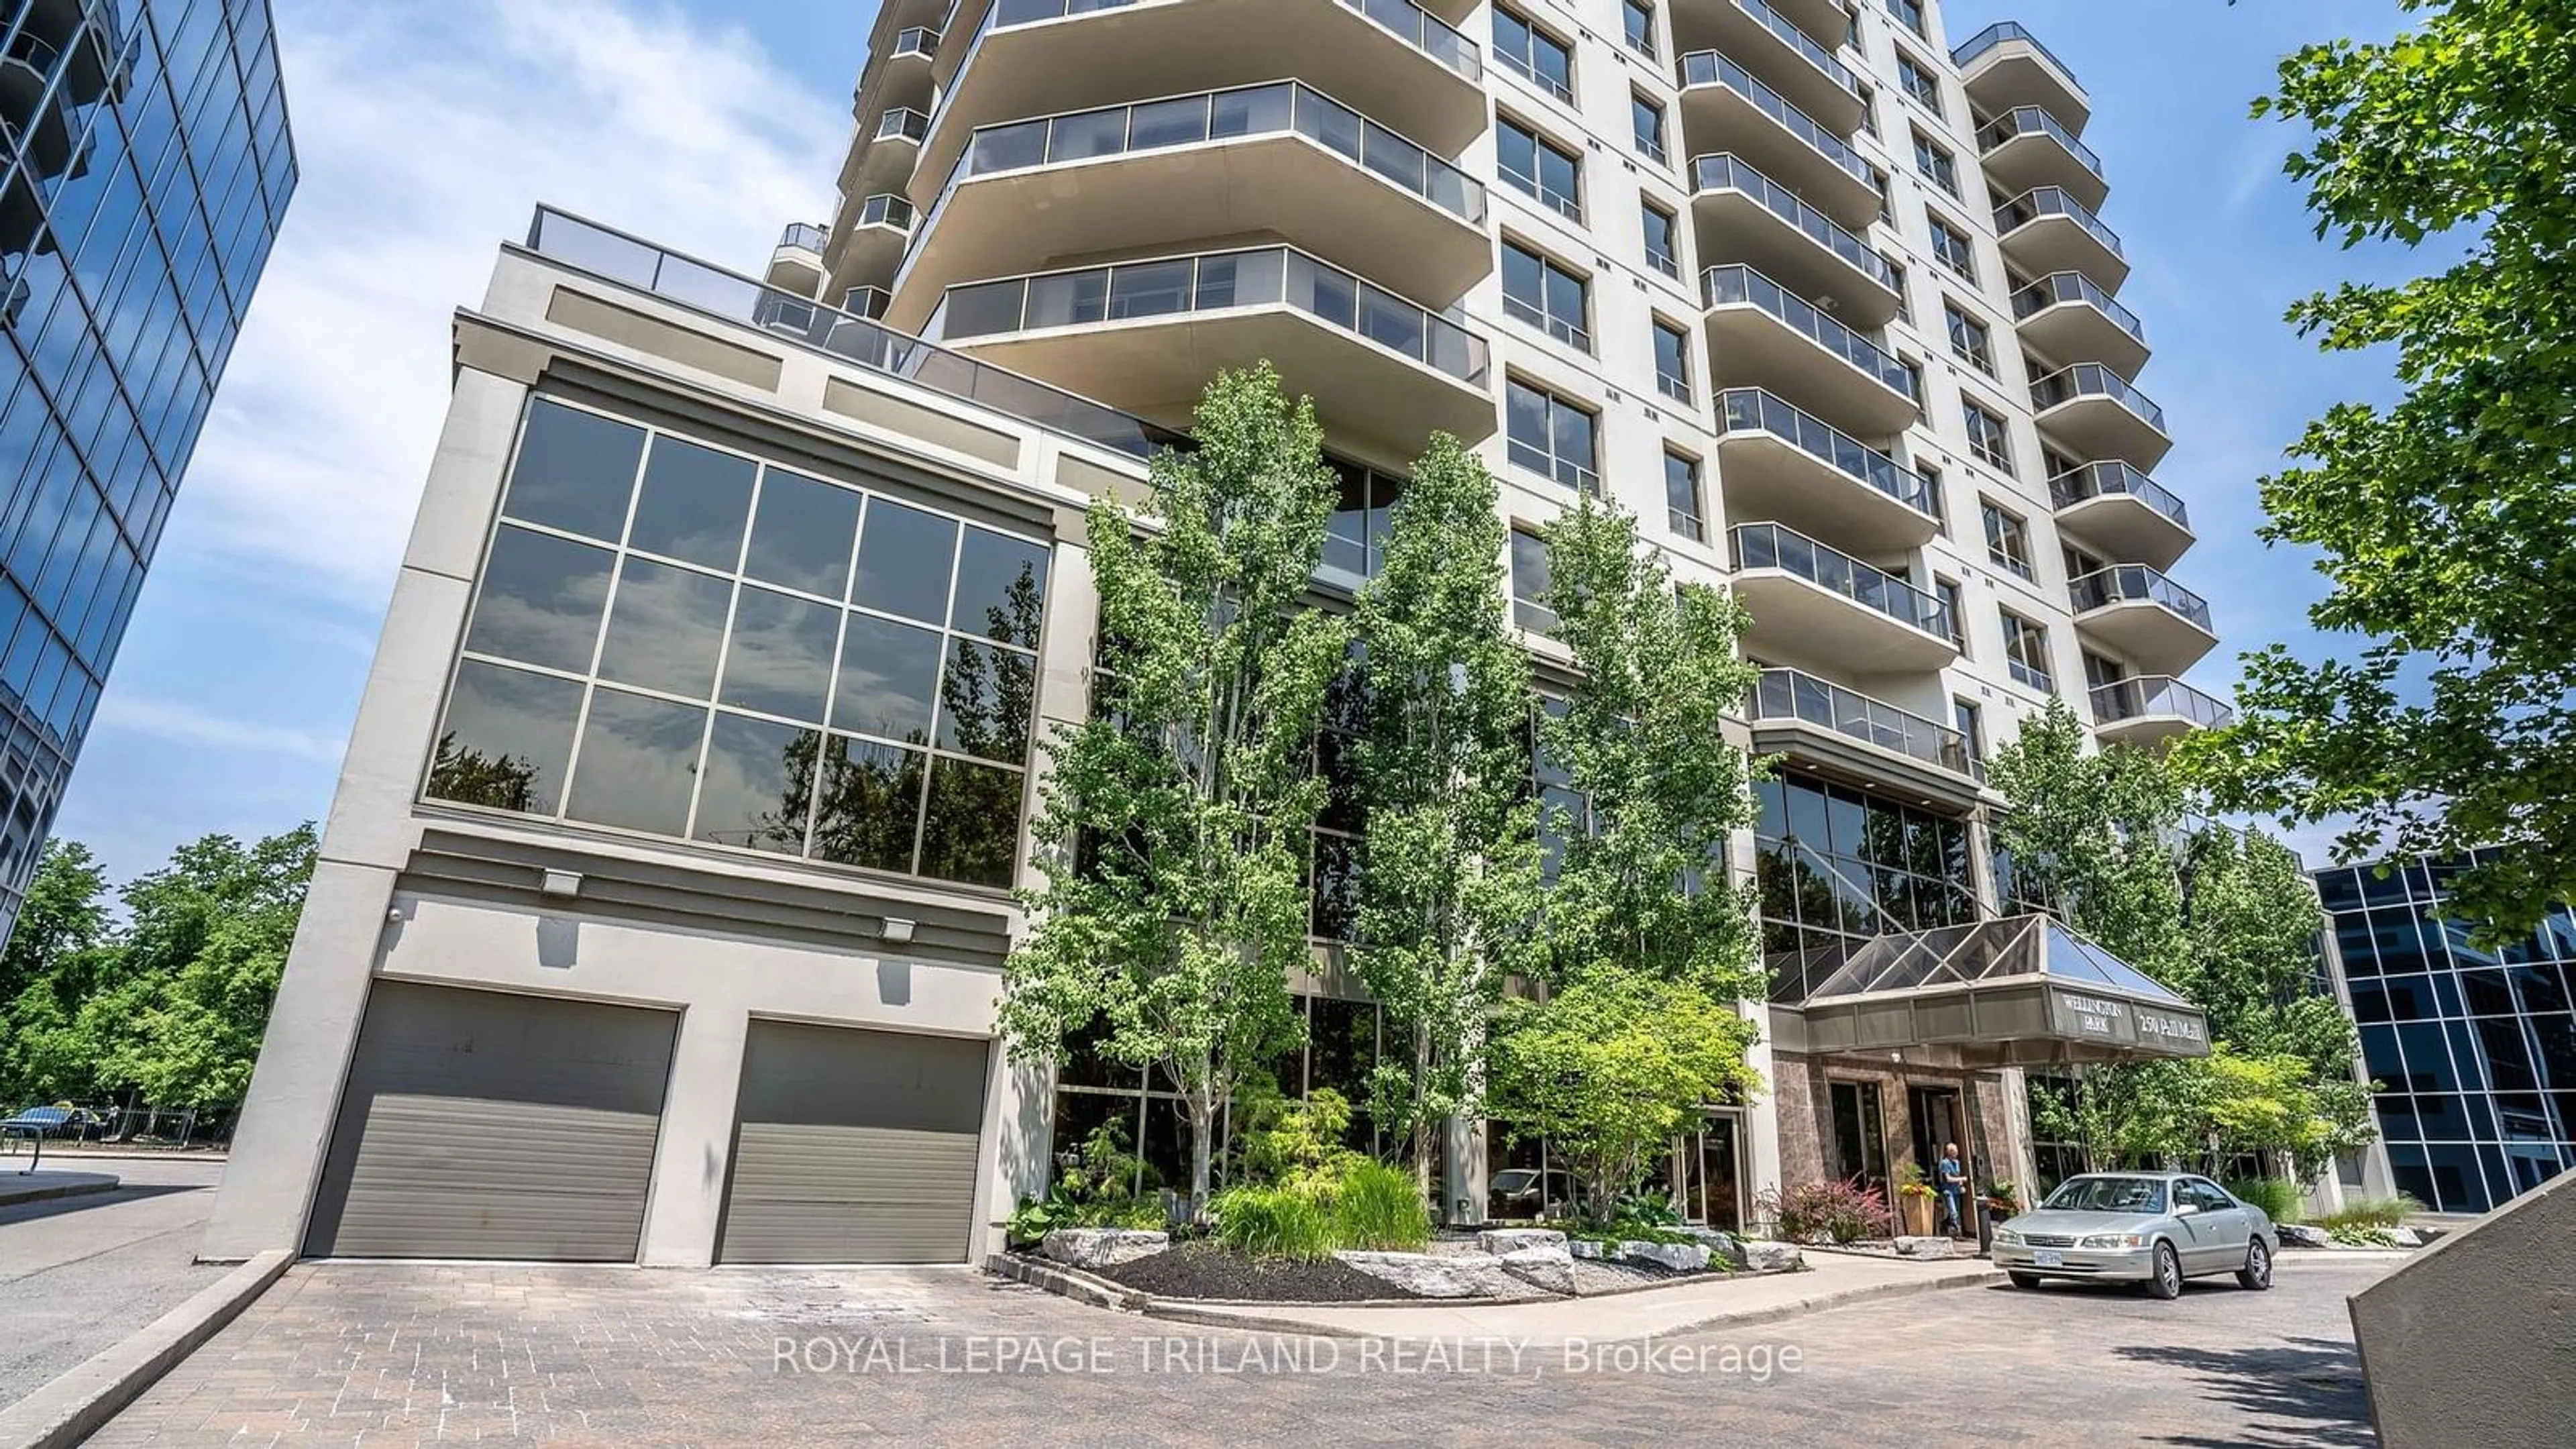 A pic from exterior of the house or condo for 250 PALL MALL St #908, London Ontario N6A 6K3